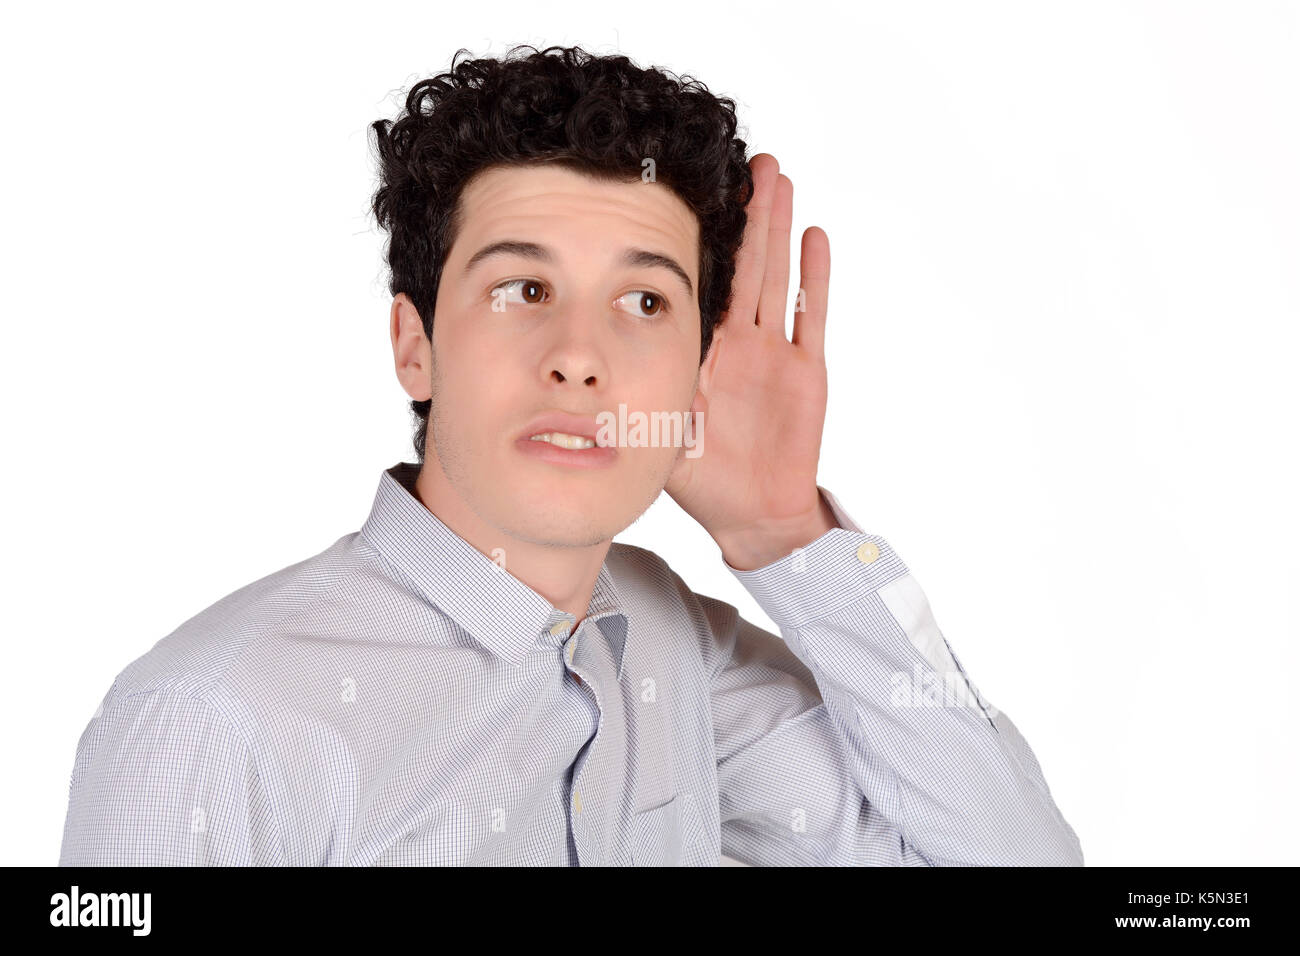 Portrait of attractive young man hearing something. Isolated white background. Stock Photo